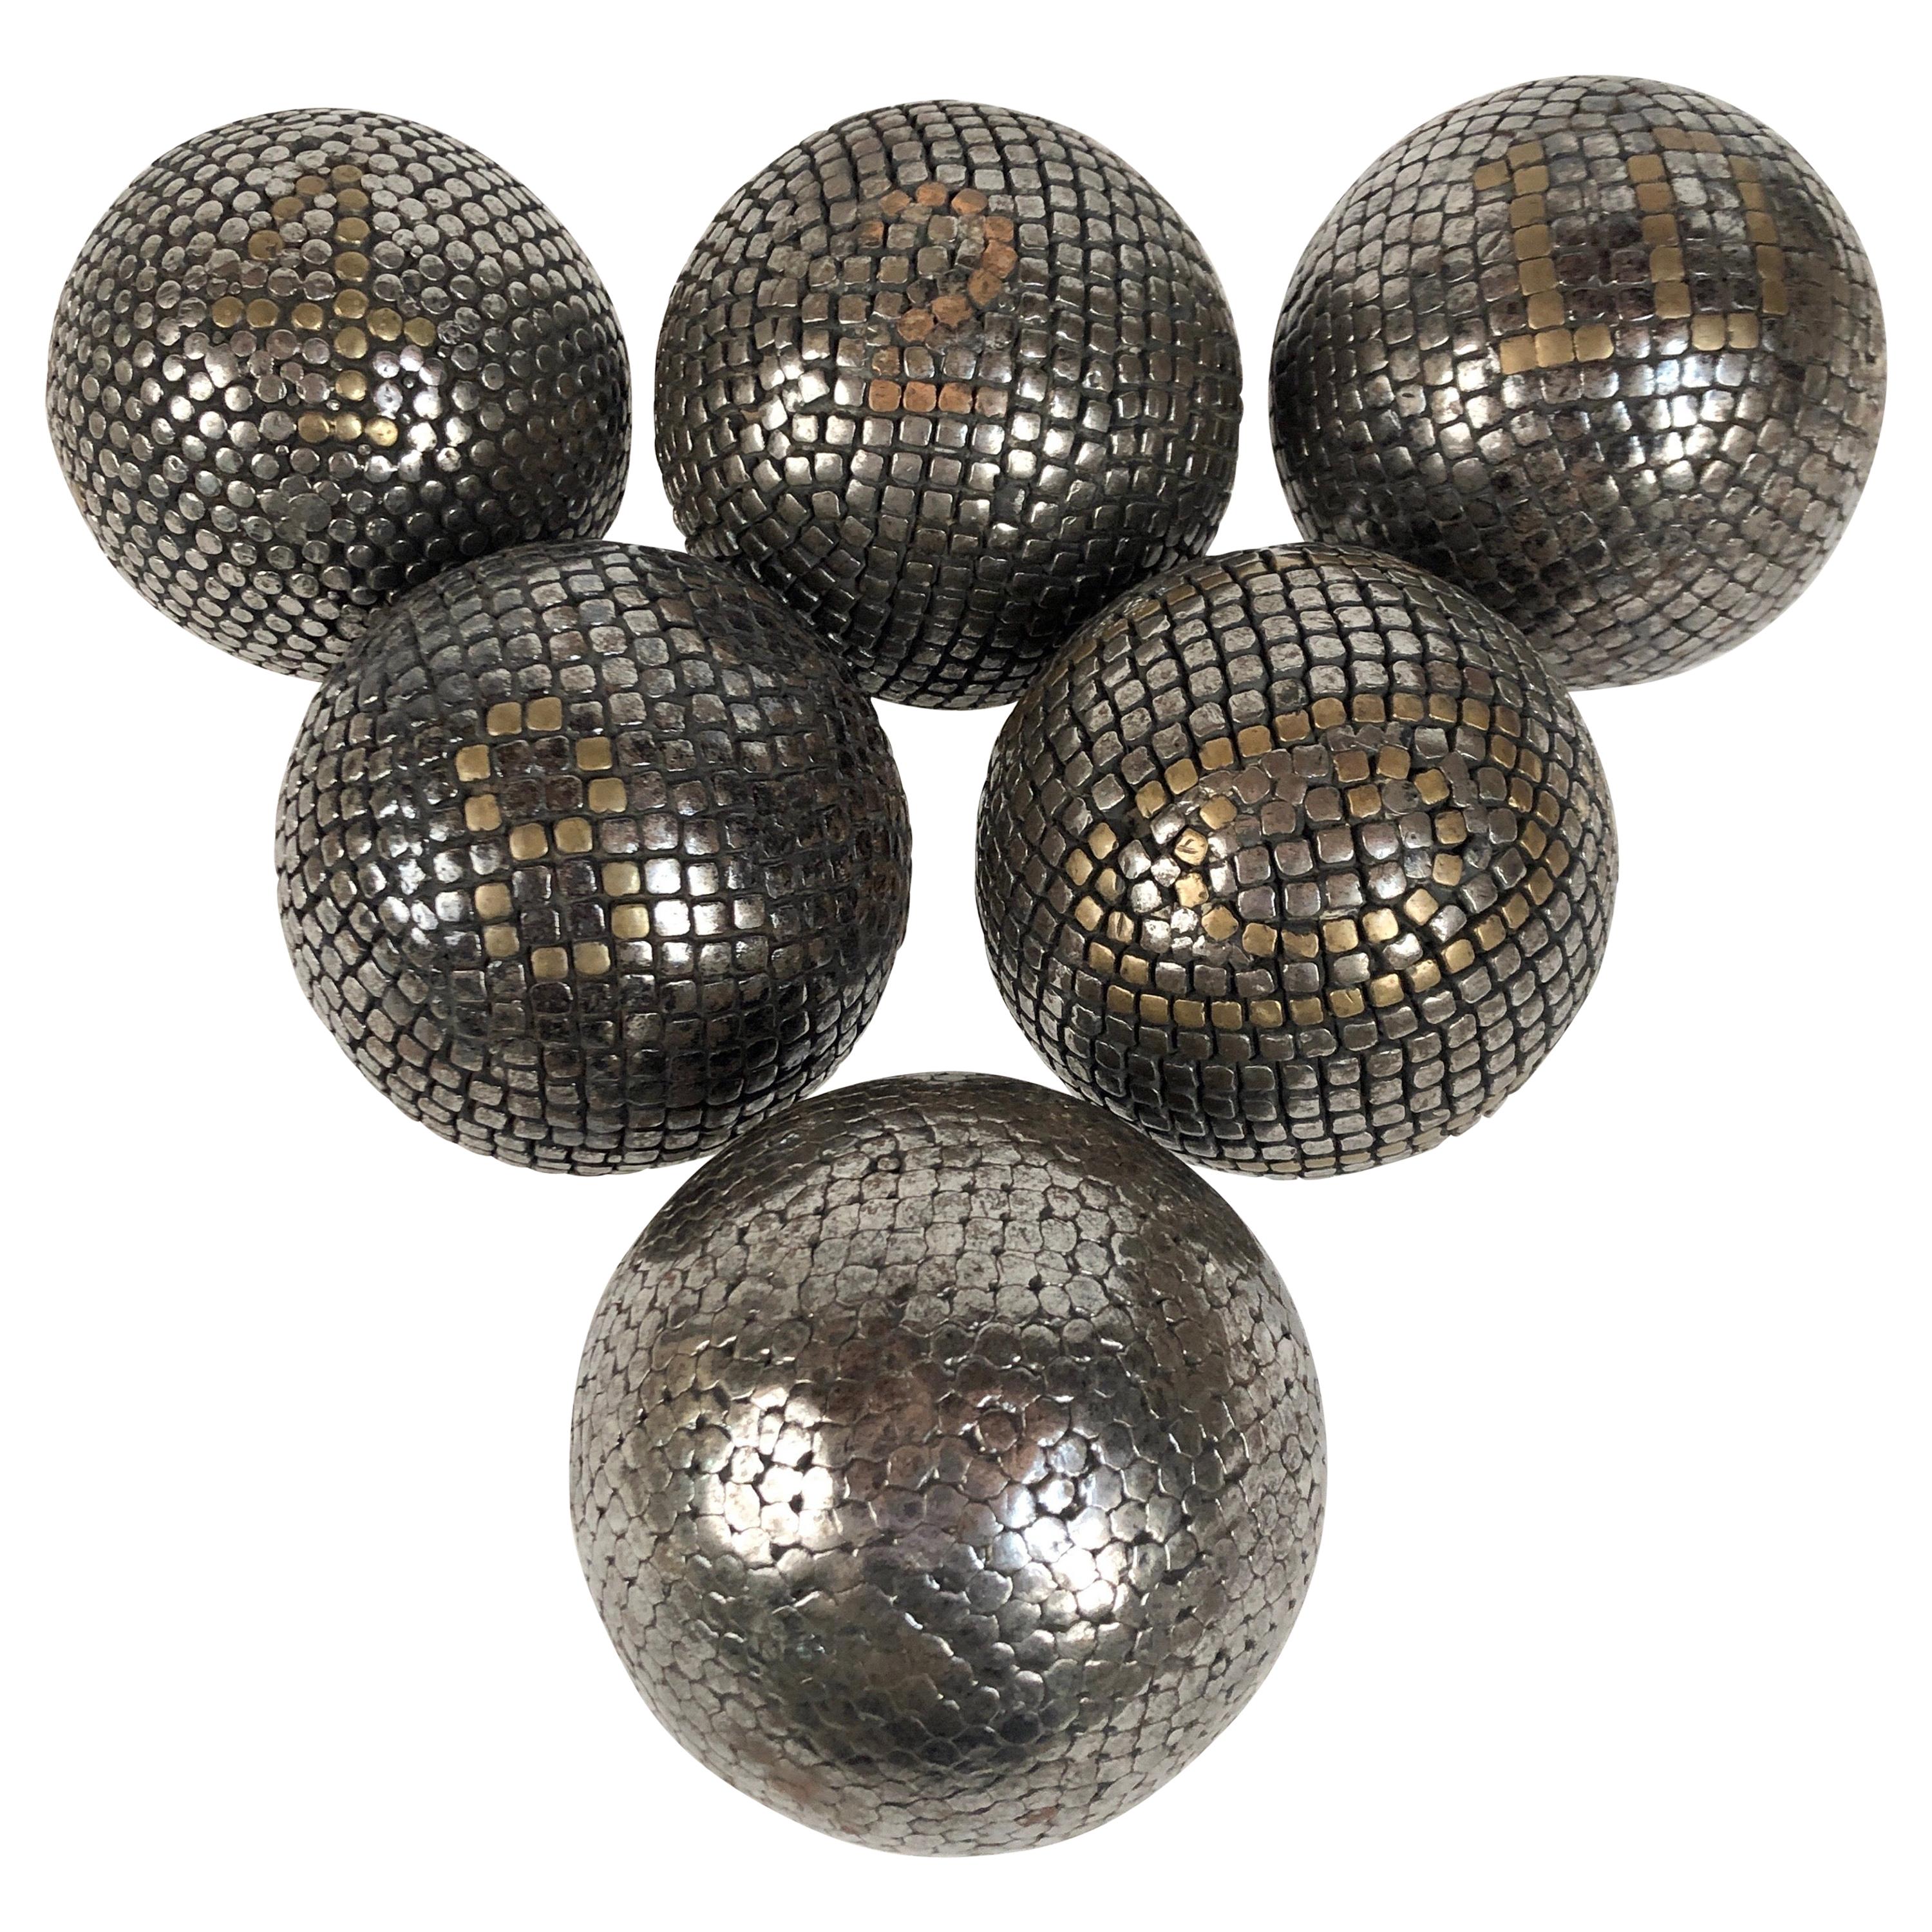 Collection of 6 Antique French Steel and Brass Studded Pétanque Balls